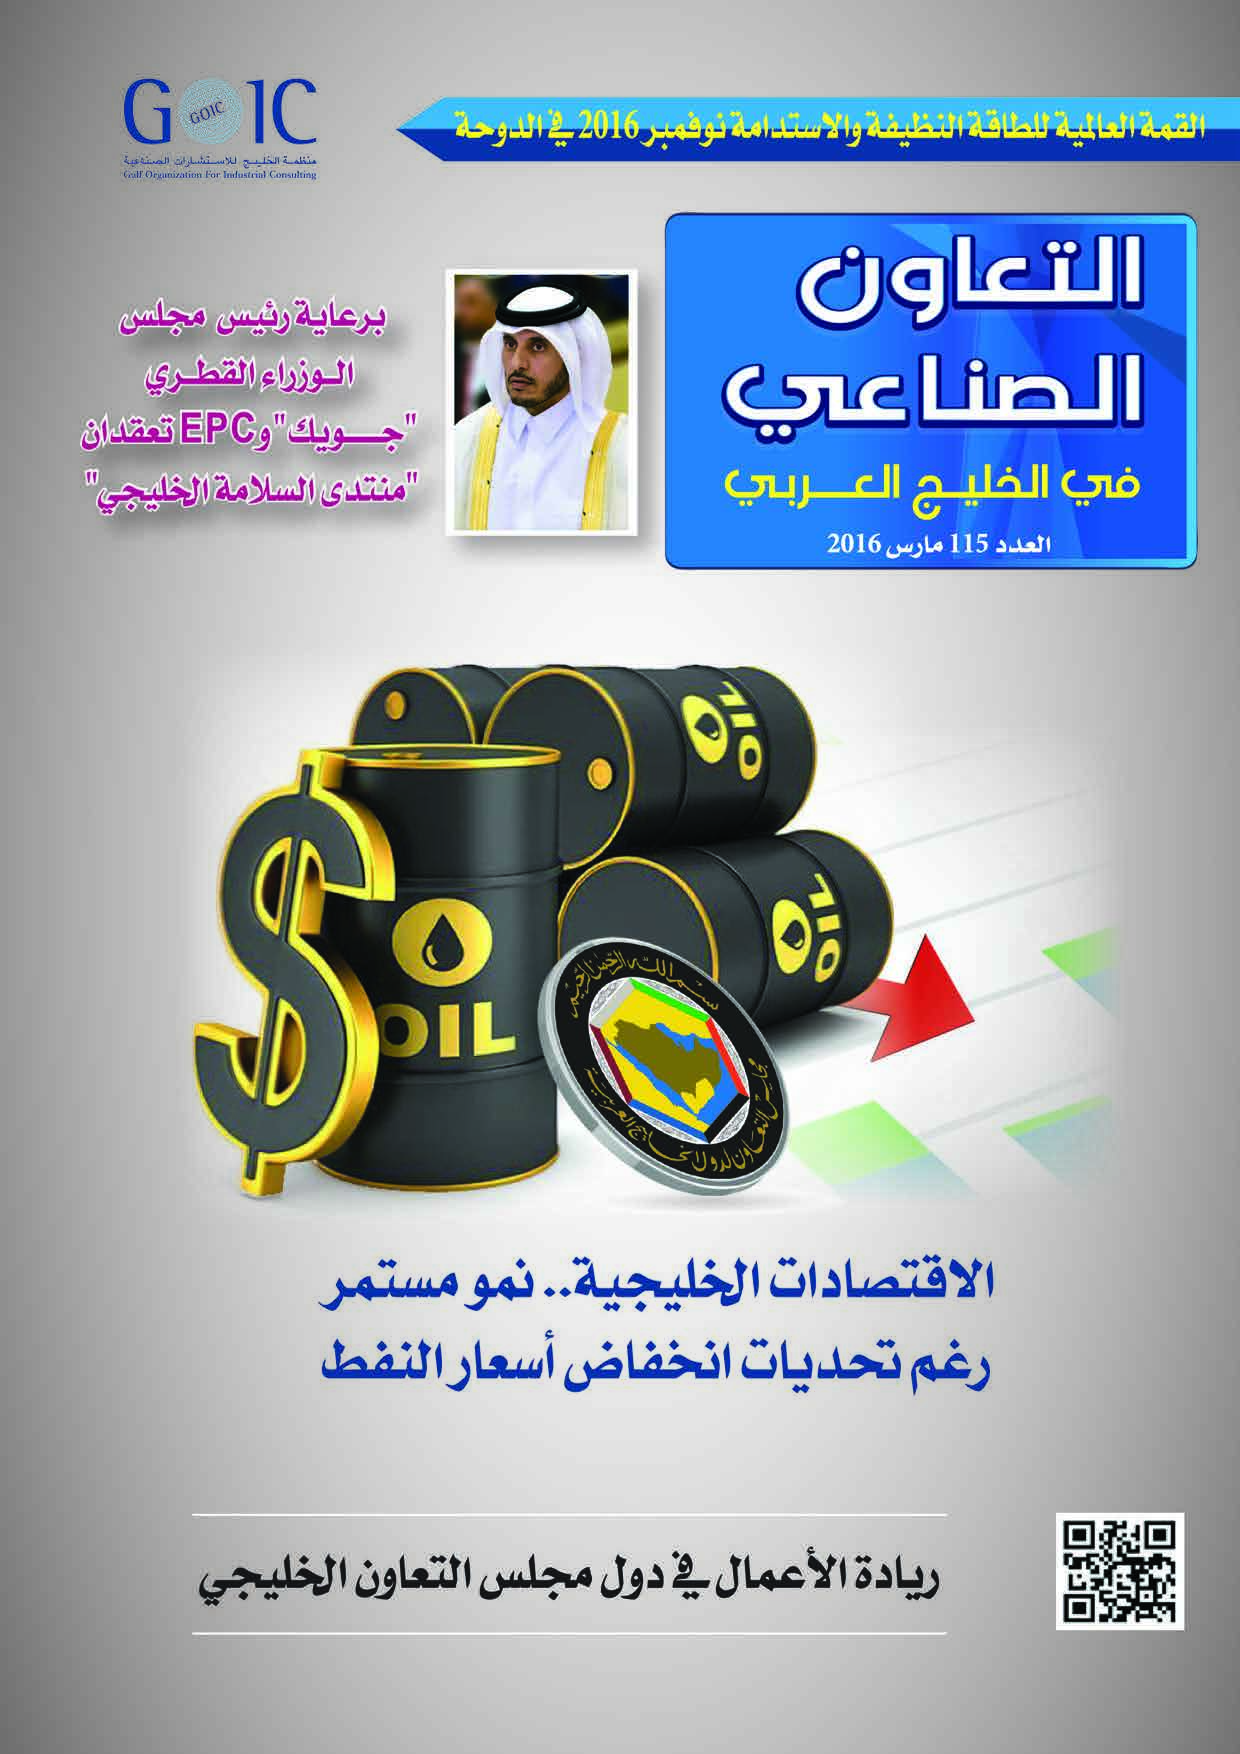 GOIC puts out the 115th issue of “The Industrial Cooperation in the Arabian Gulf” Magazine